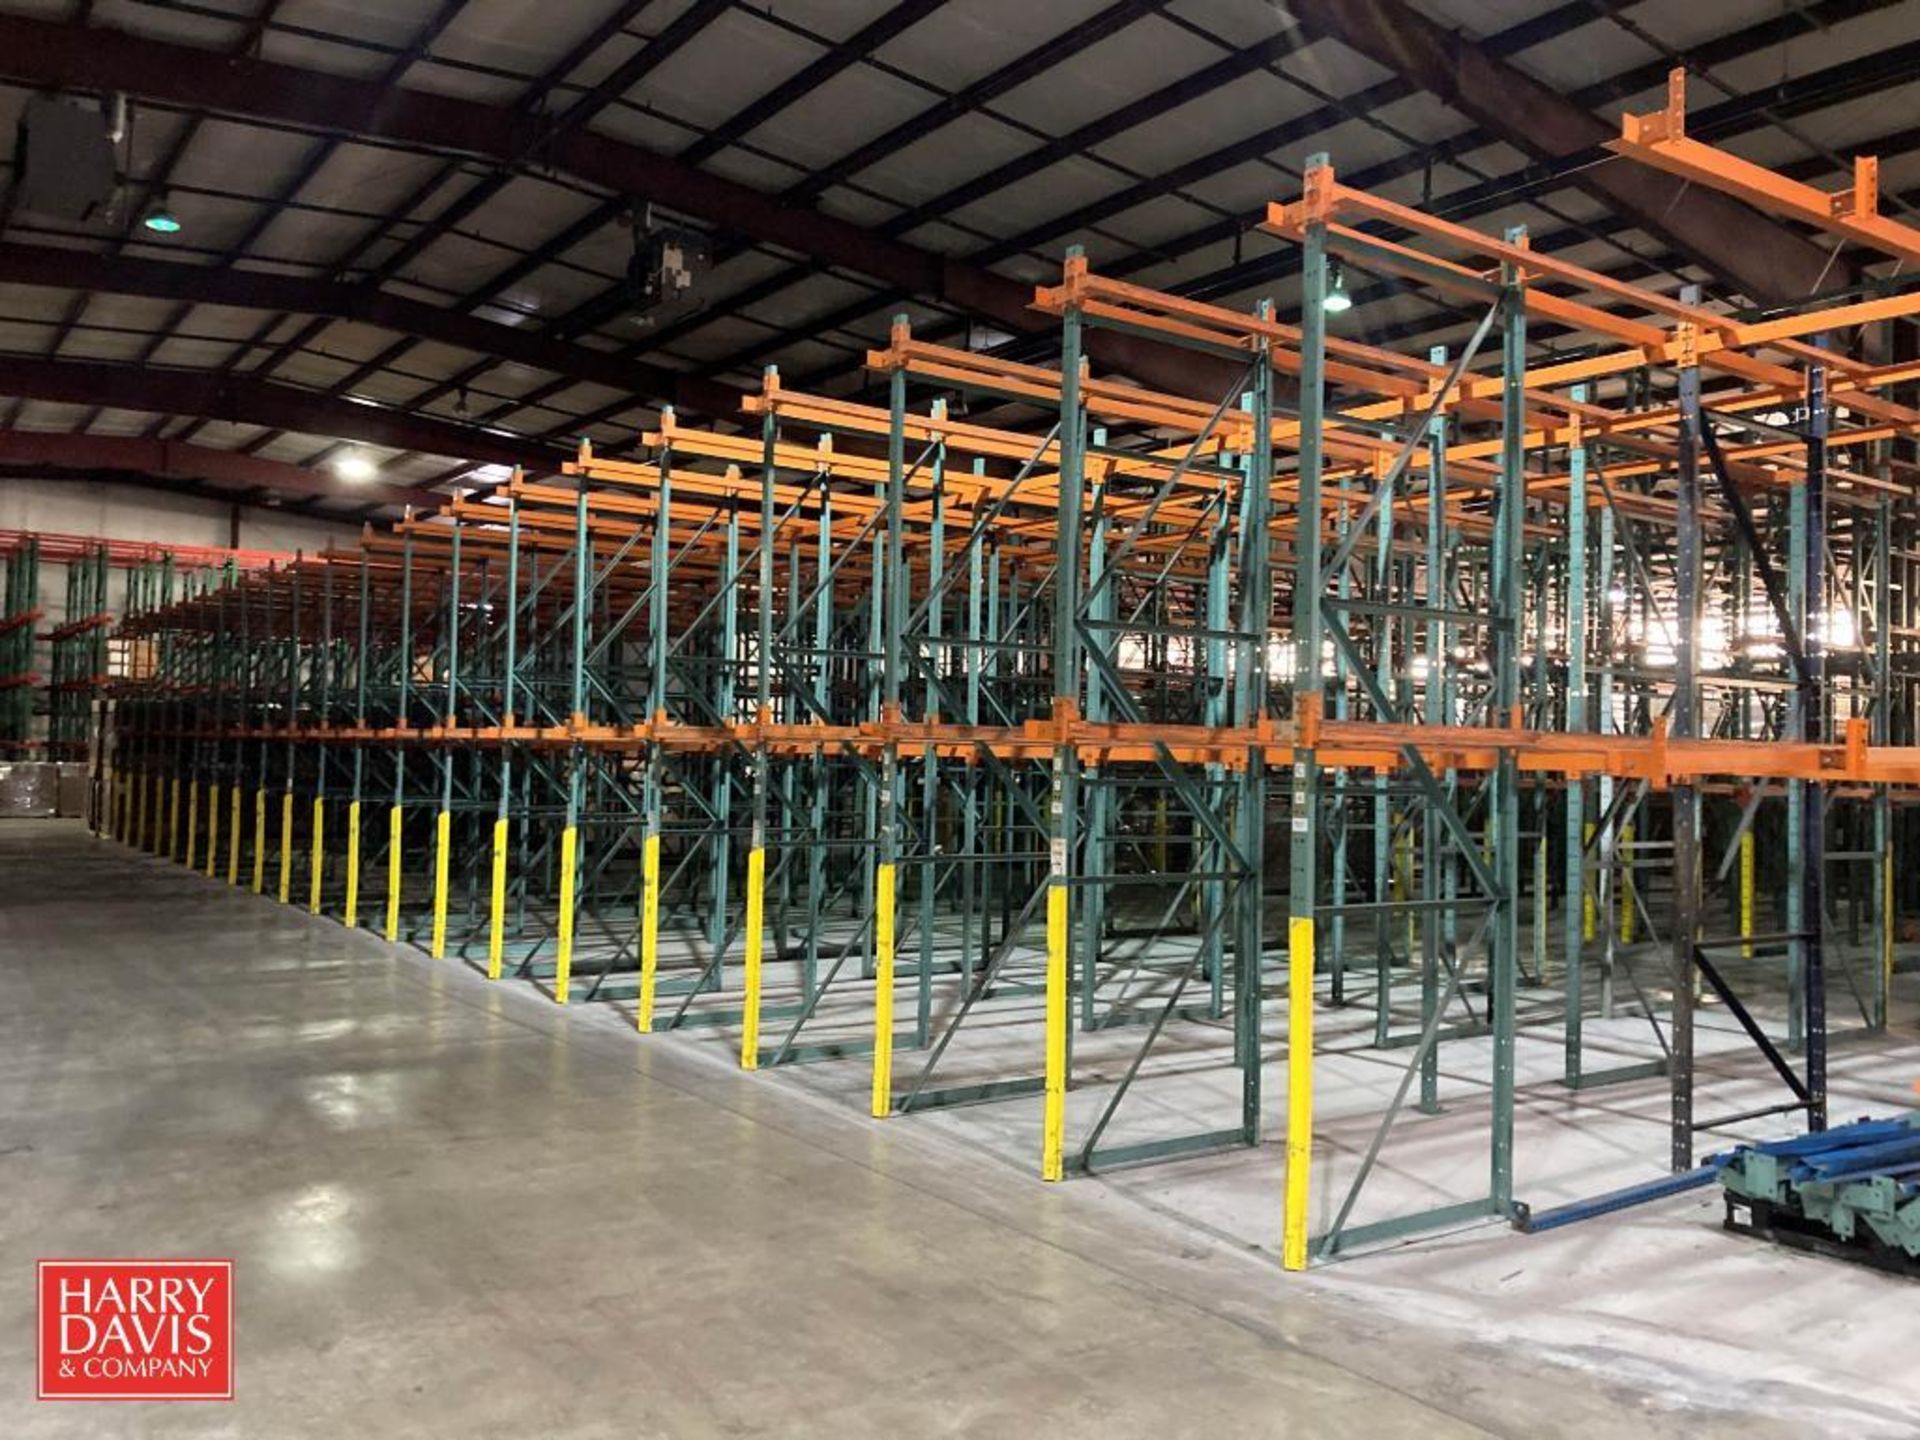 Bays, Drive-In Pallet Racking, 4 High - 24 Pallet Spaces Each (Location: Little Rock, AR)